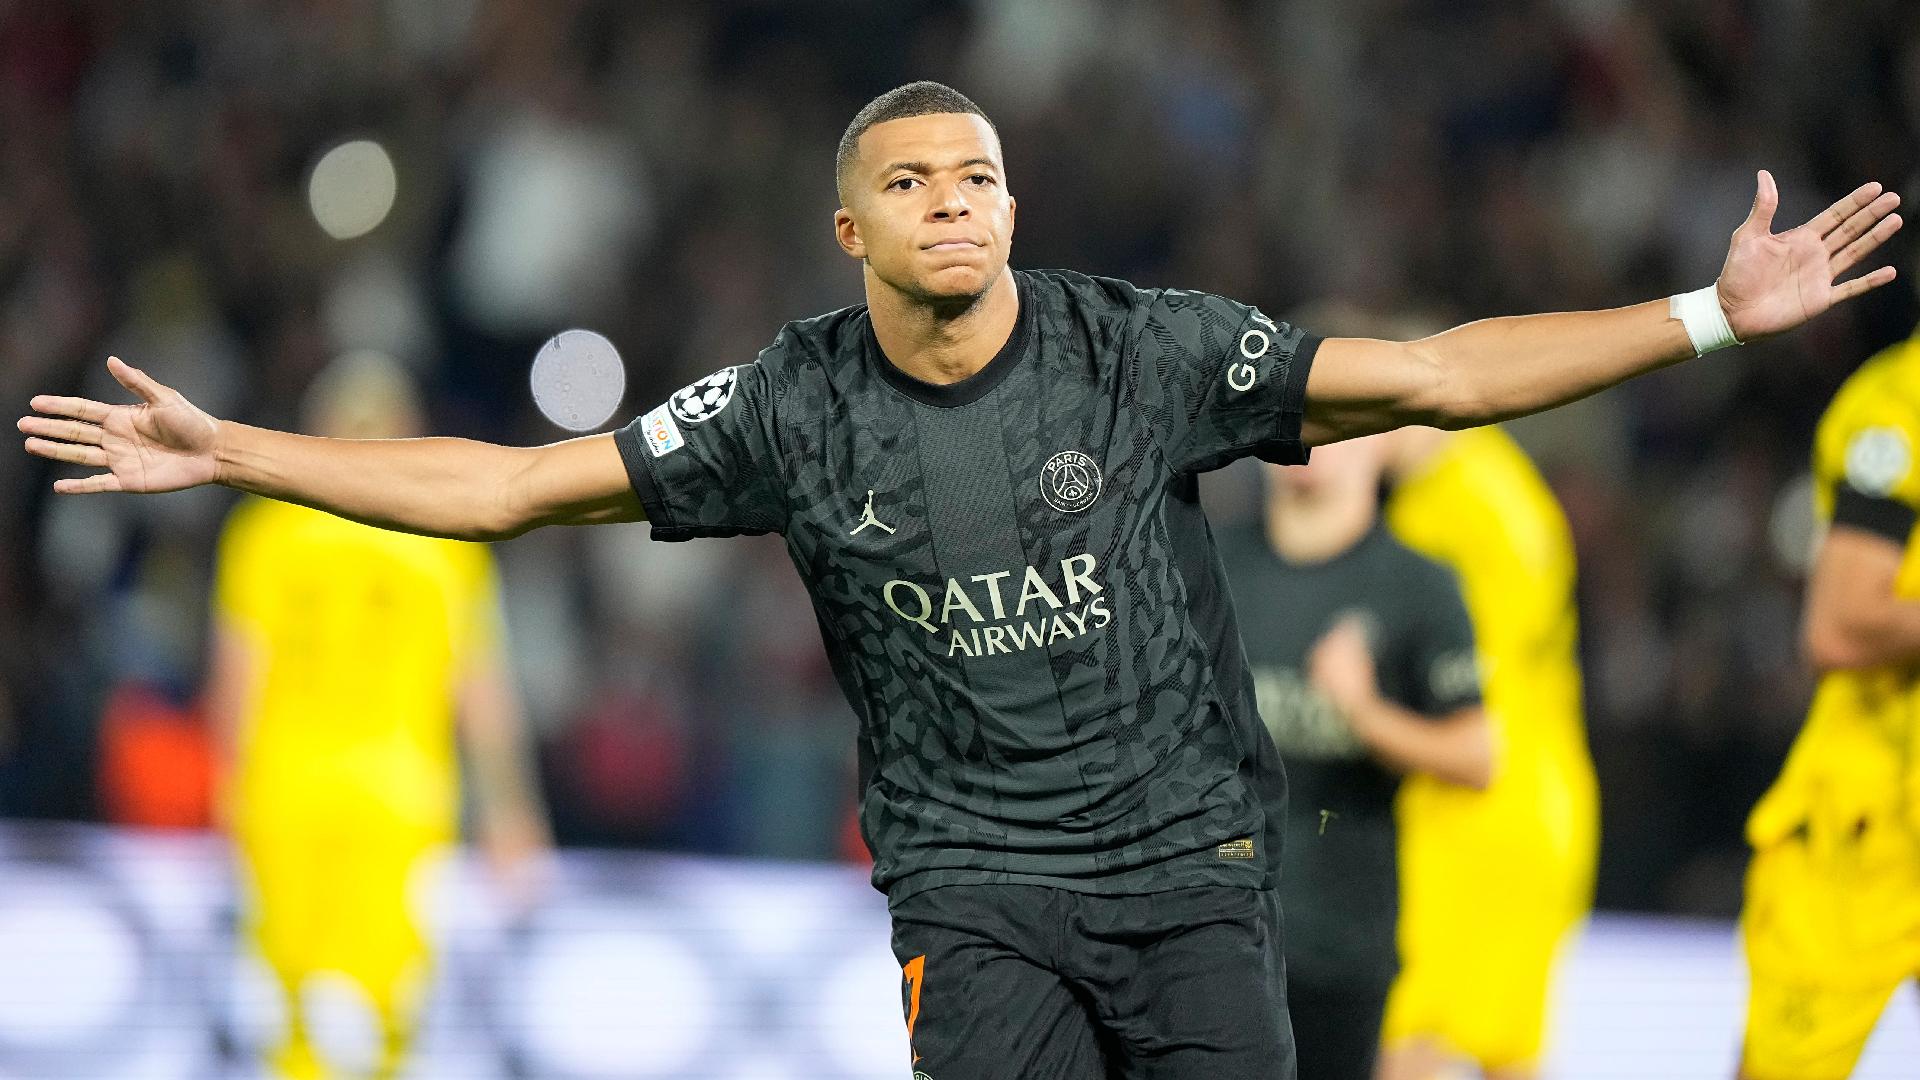 Luis Enrique expects PSG forwards to follow Kylian Mbappe’s lead